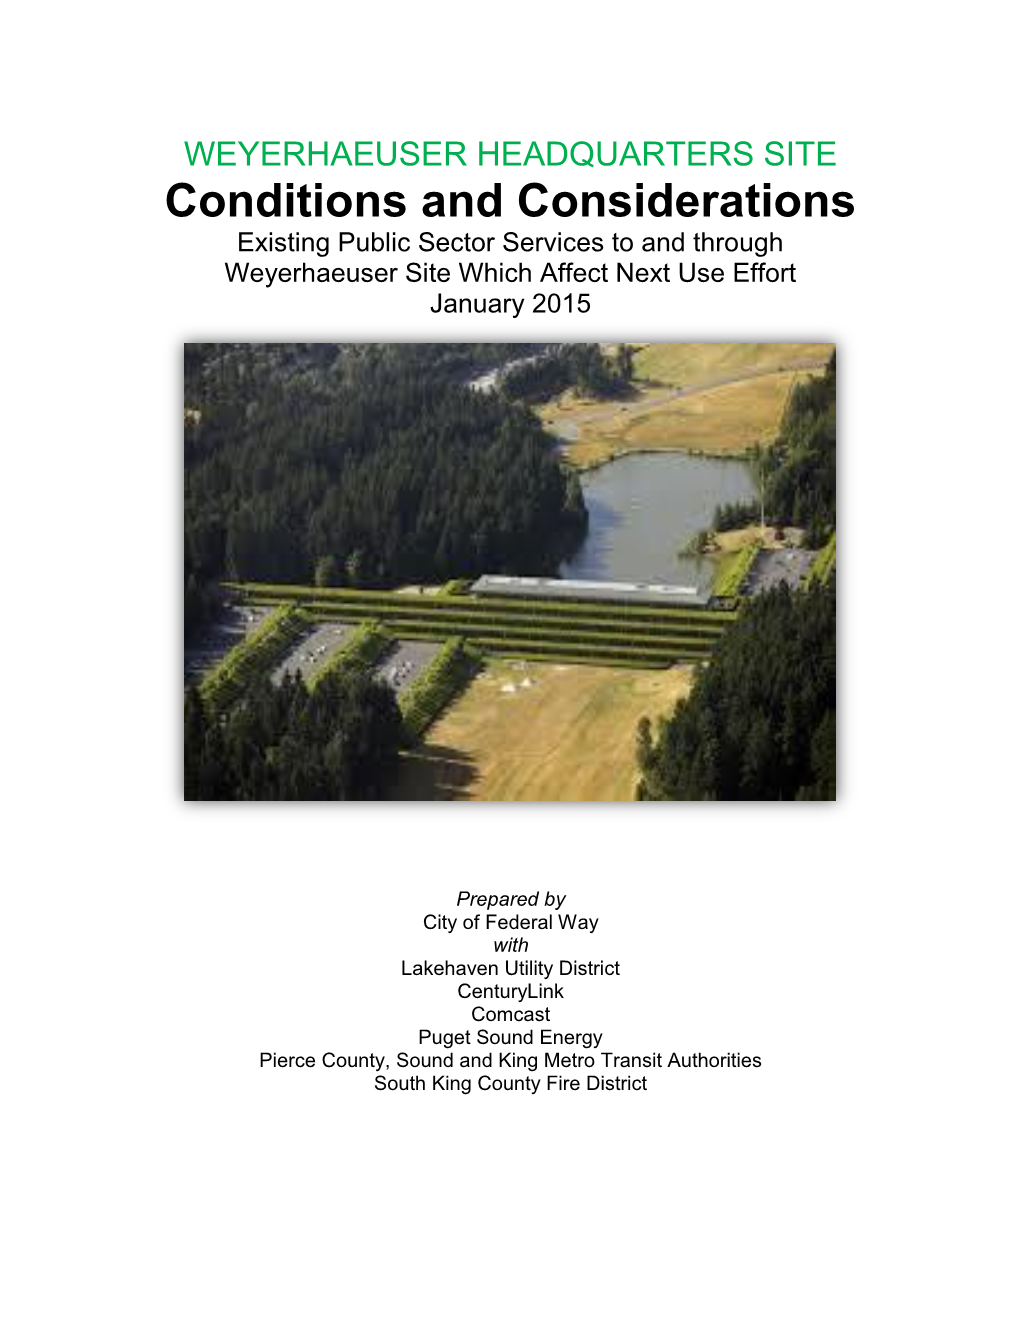 Conditions and Considerations Existing Public Sector Services to and Through Weyerhaeuser Site Which Affect Next Use Effort January 2015